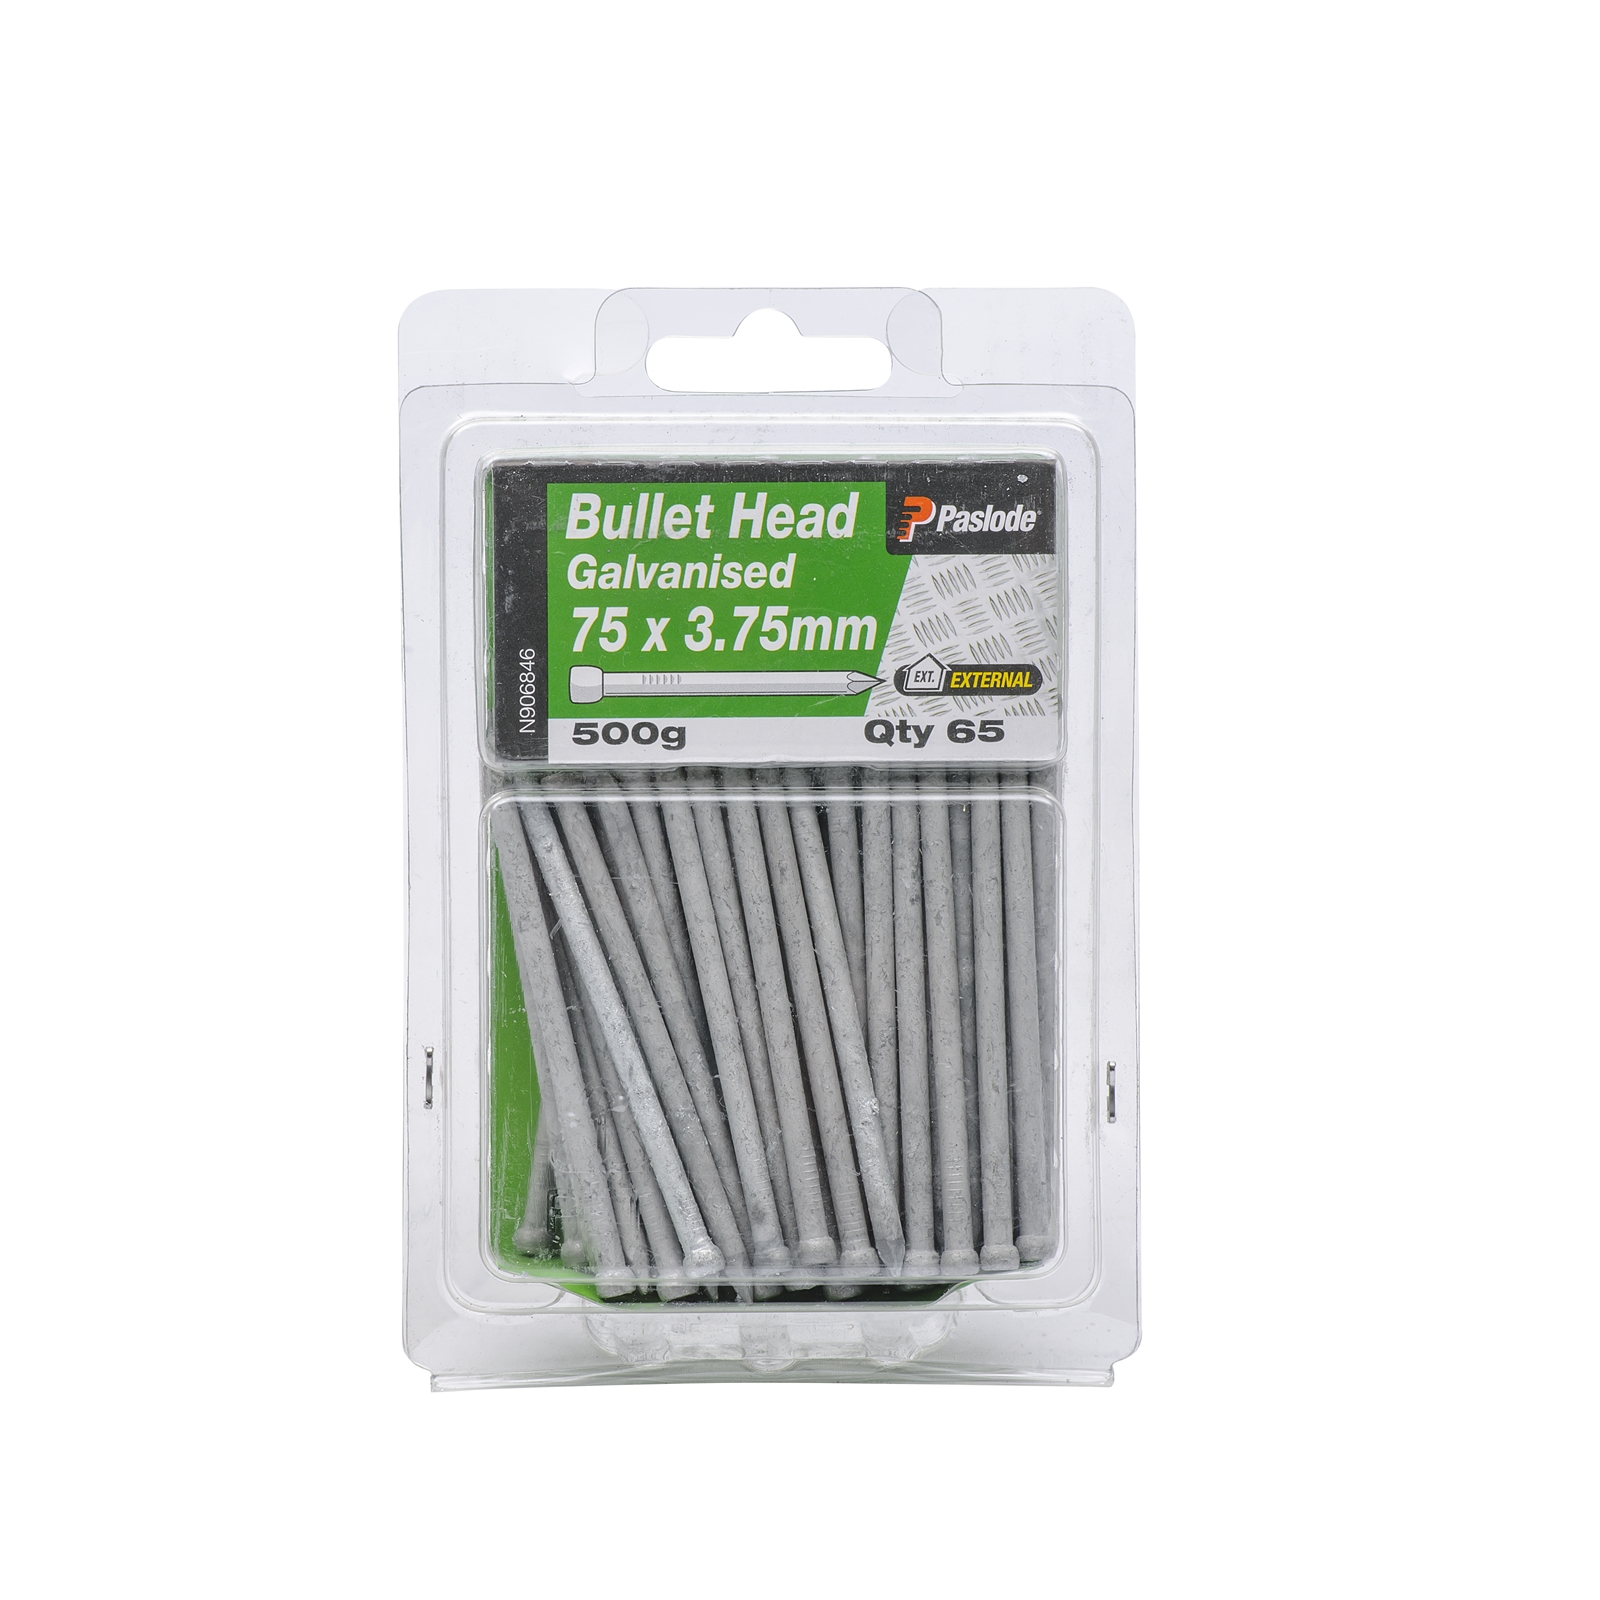 Paslode 75 x 3.75mm 500g Galvanised Bullet Head Nails - 65 Pack